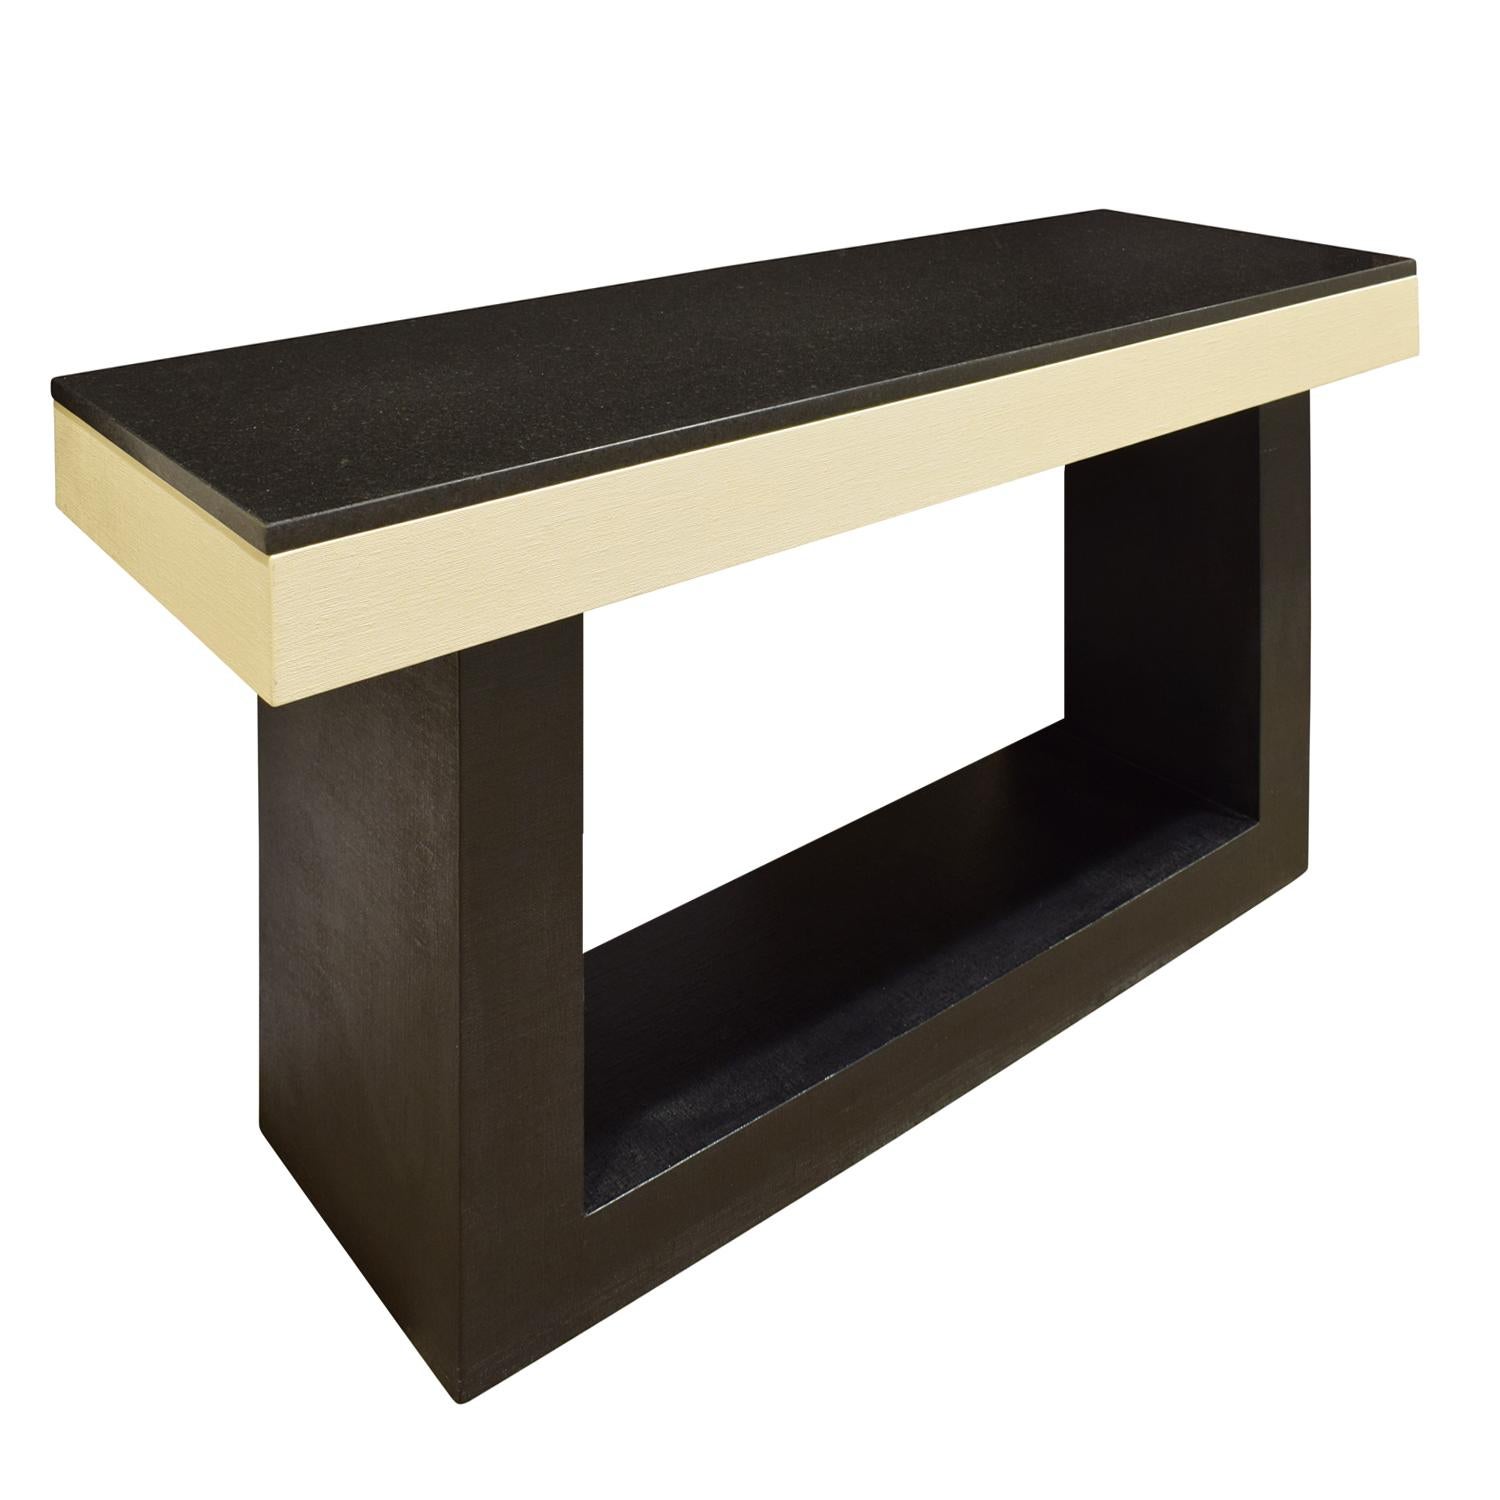 Clean line console table in black and ivory lacquered linen with black granite top, custom design, American, 1970s. This piece is beautifully made and luxurious.